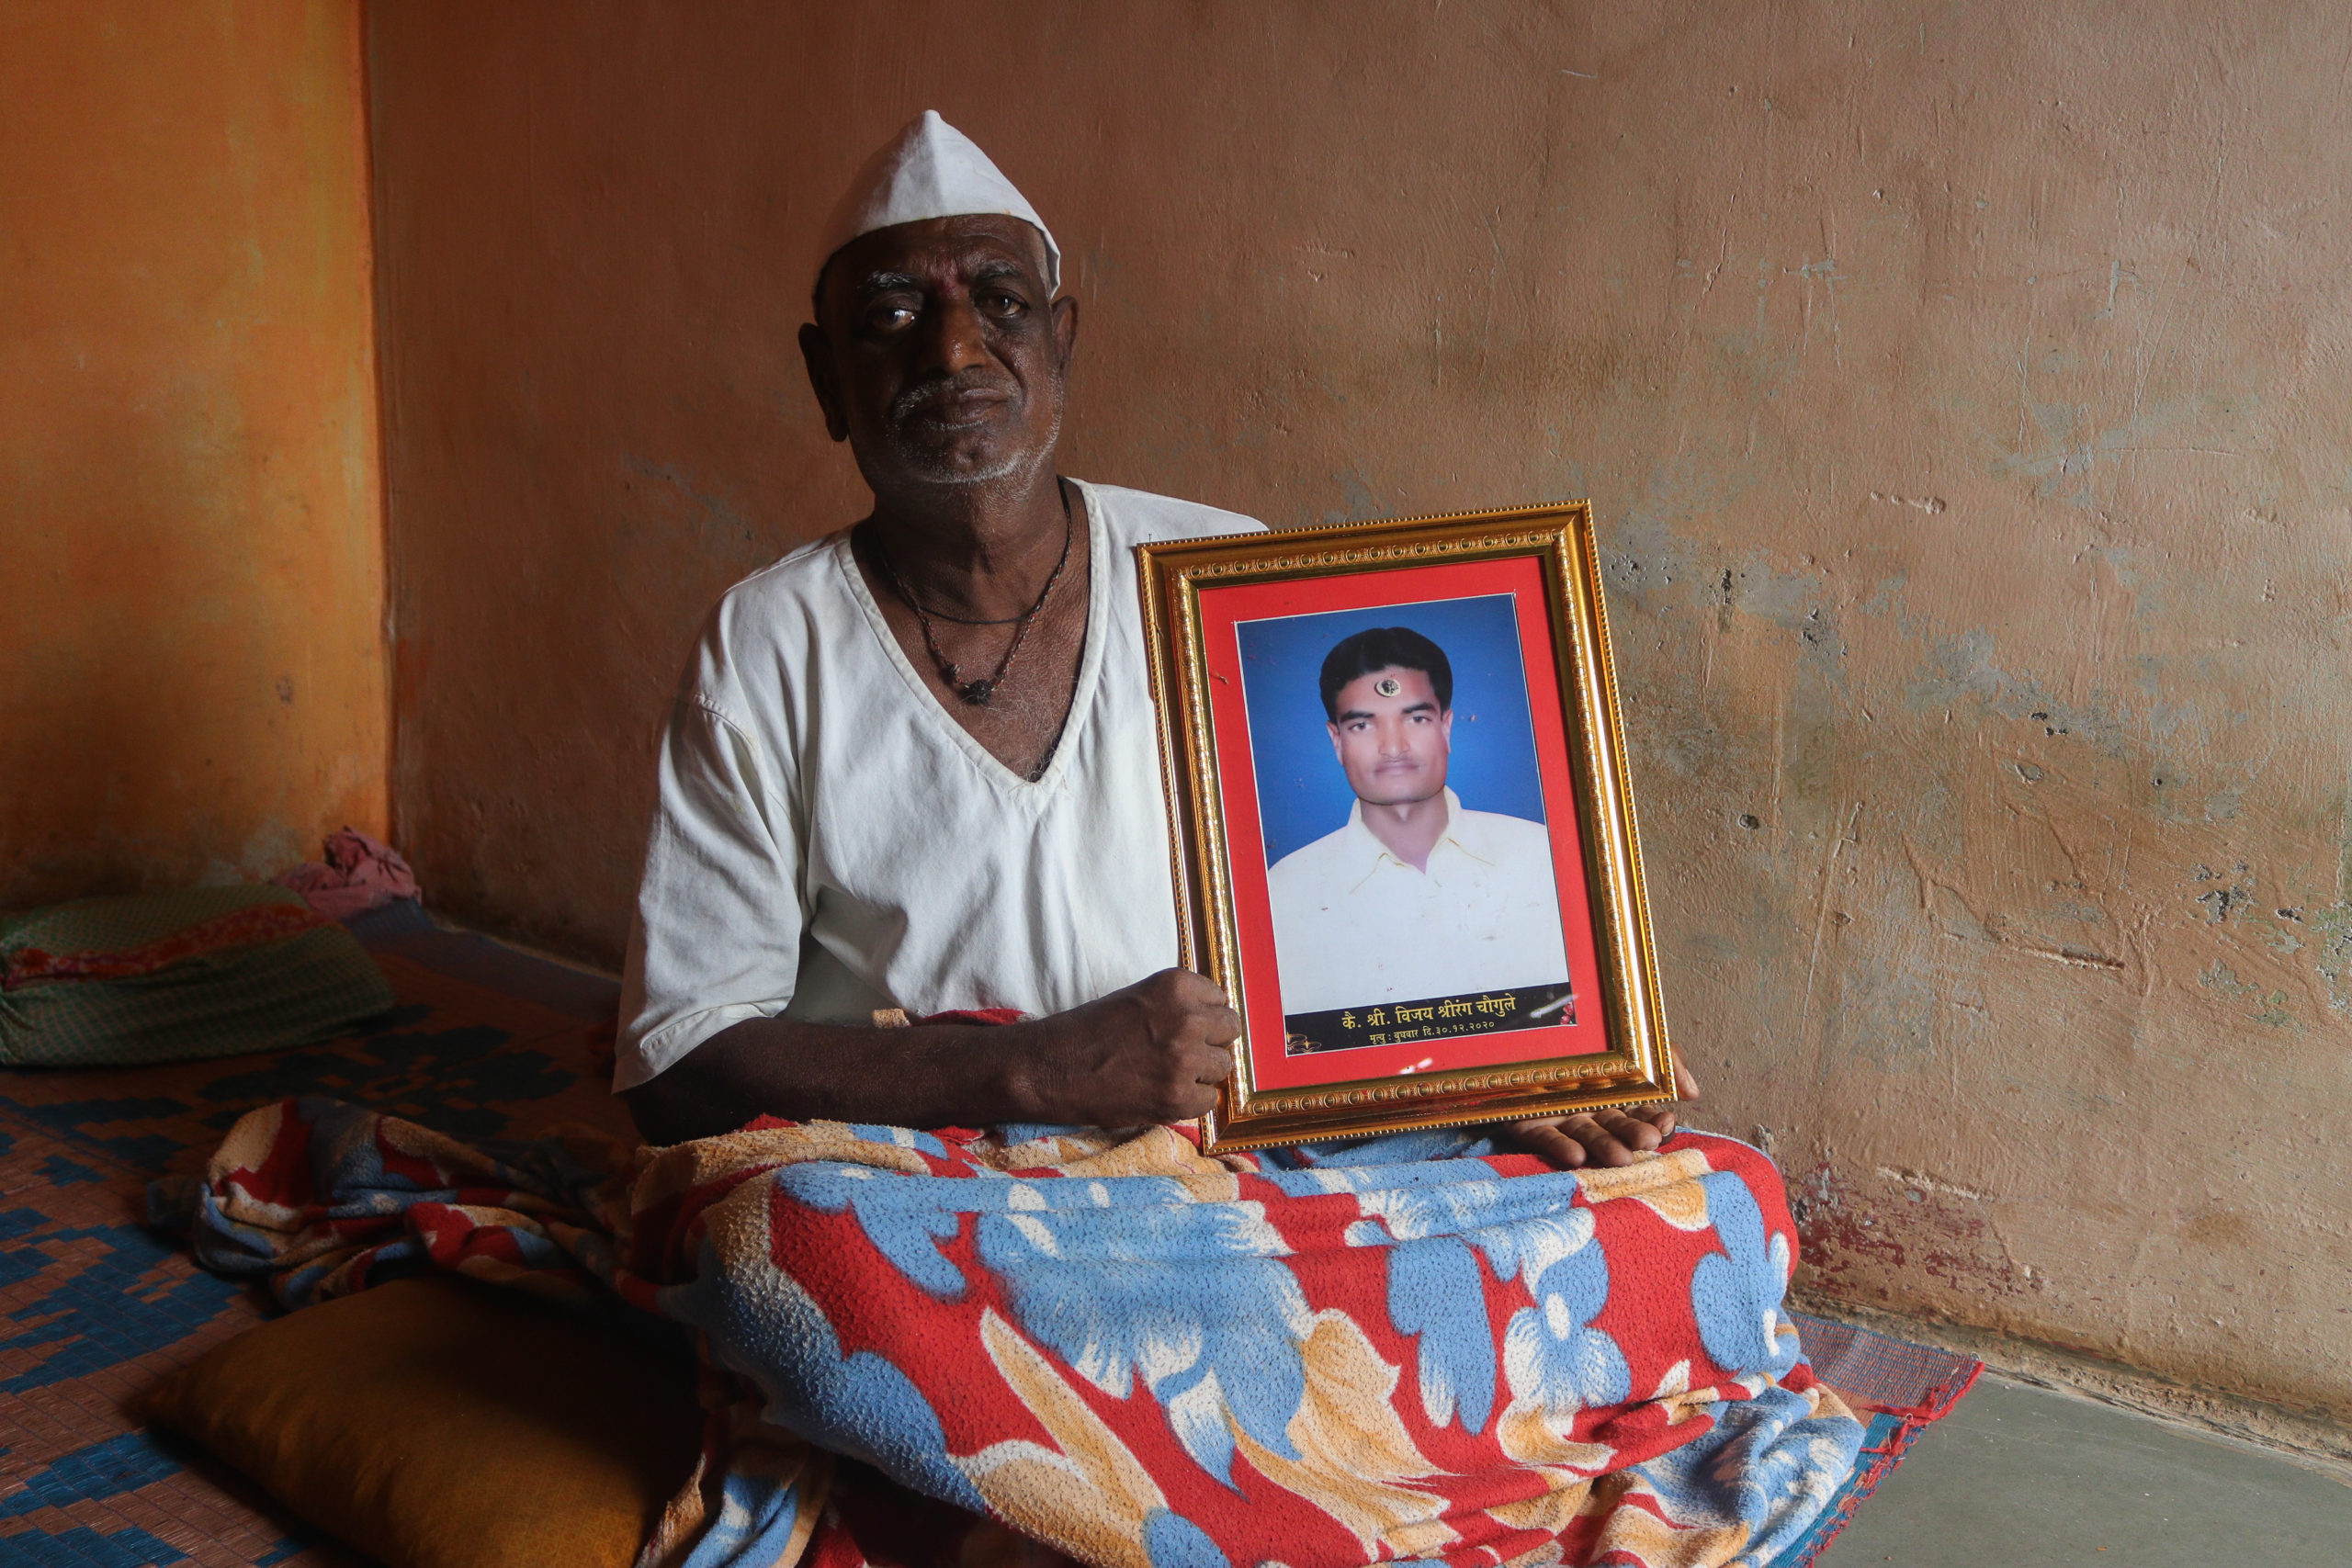 Shrirang Chougule, holding his son’s photo: “Even today, I can’t believe my son who was so strong and gave all of us hope died by suicide.” / credit: Sanket Jain